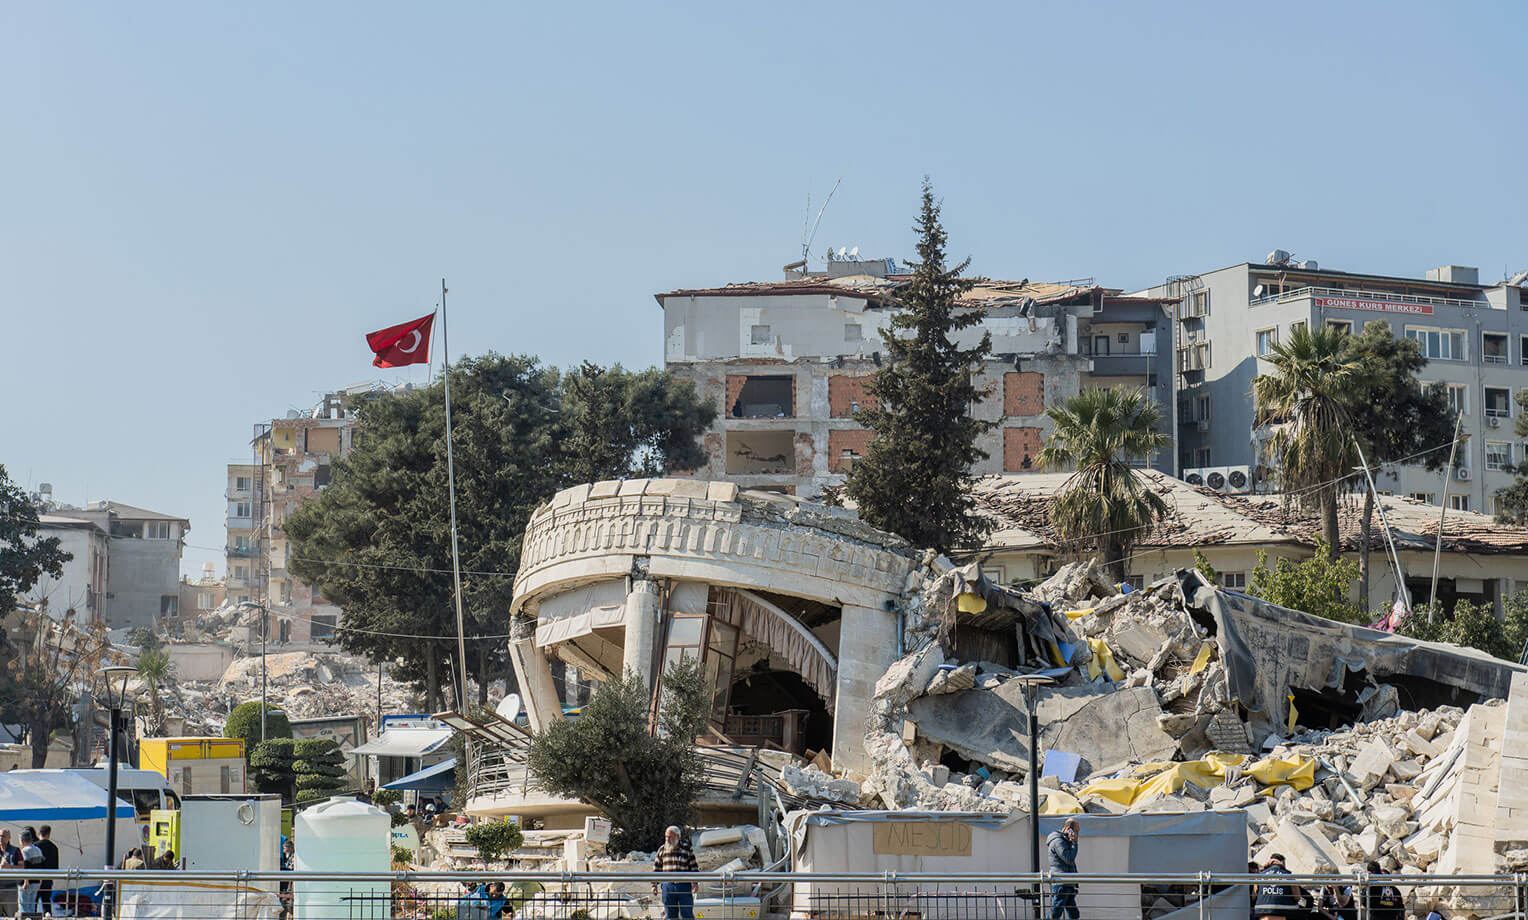 Samaritan's Purse is responding after earthquakes devastated southern Turkey.